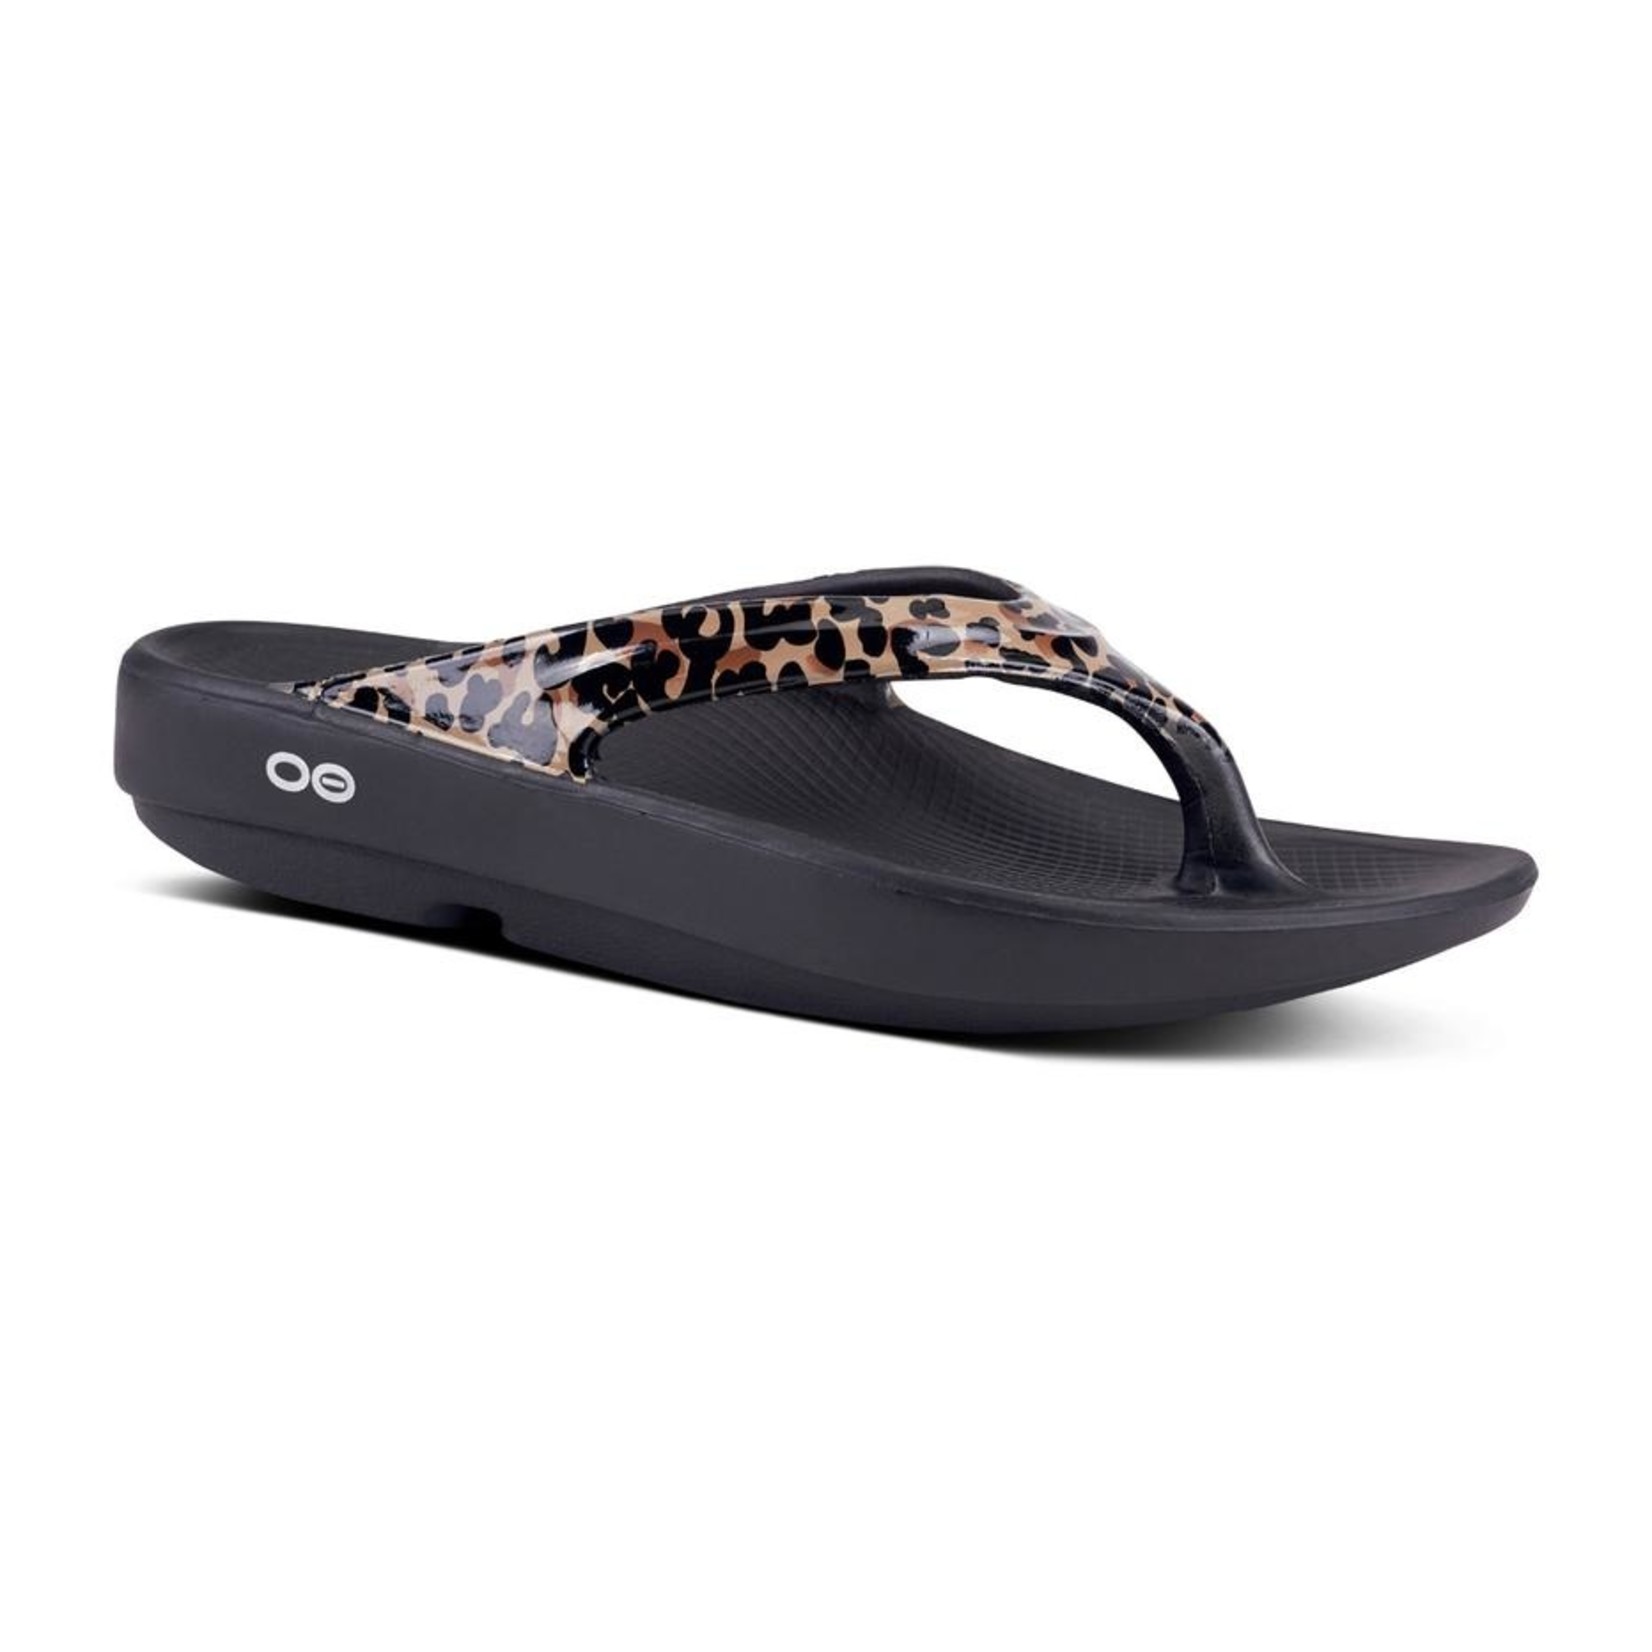 OOFOS OOFOS Women's OOahh Limited Sandals